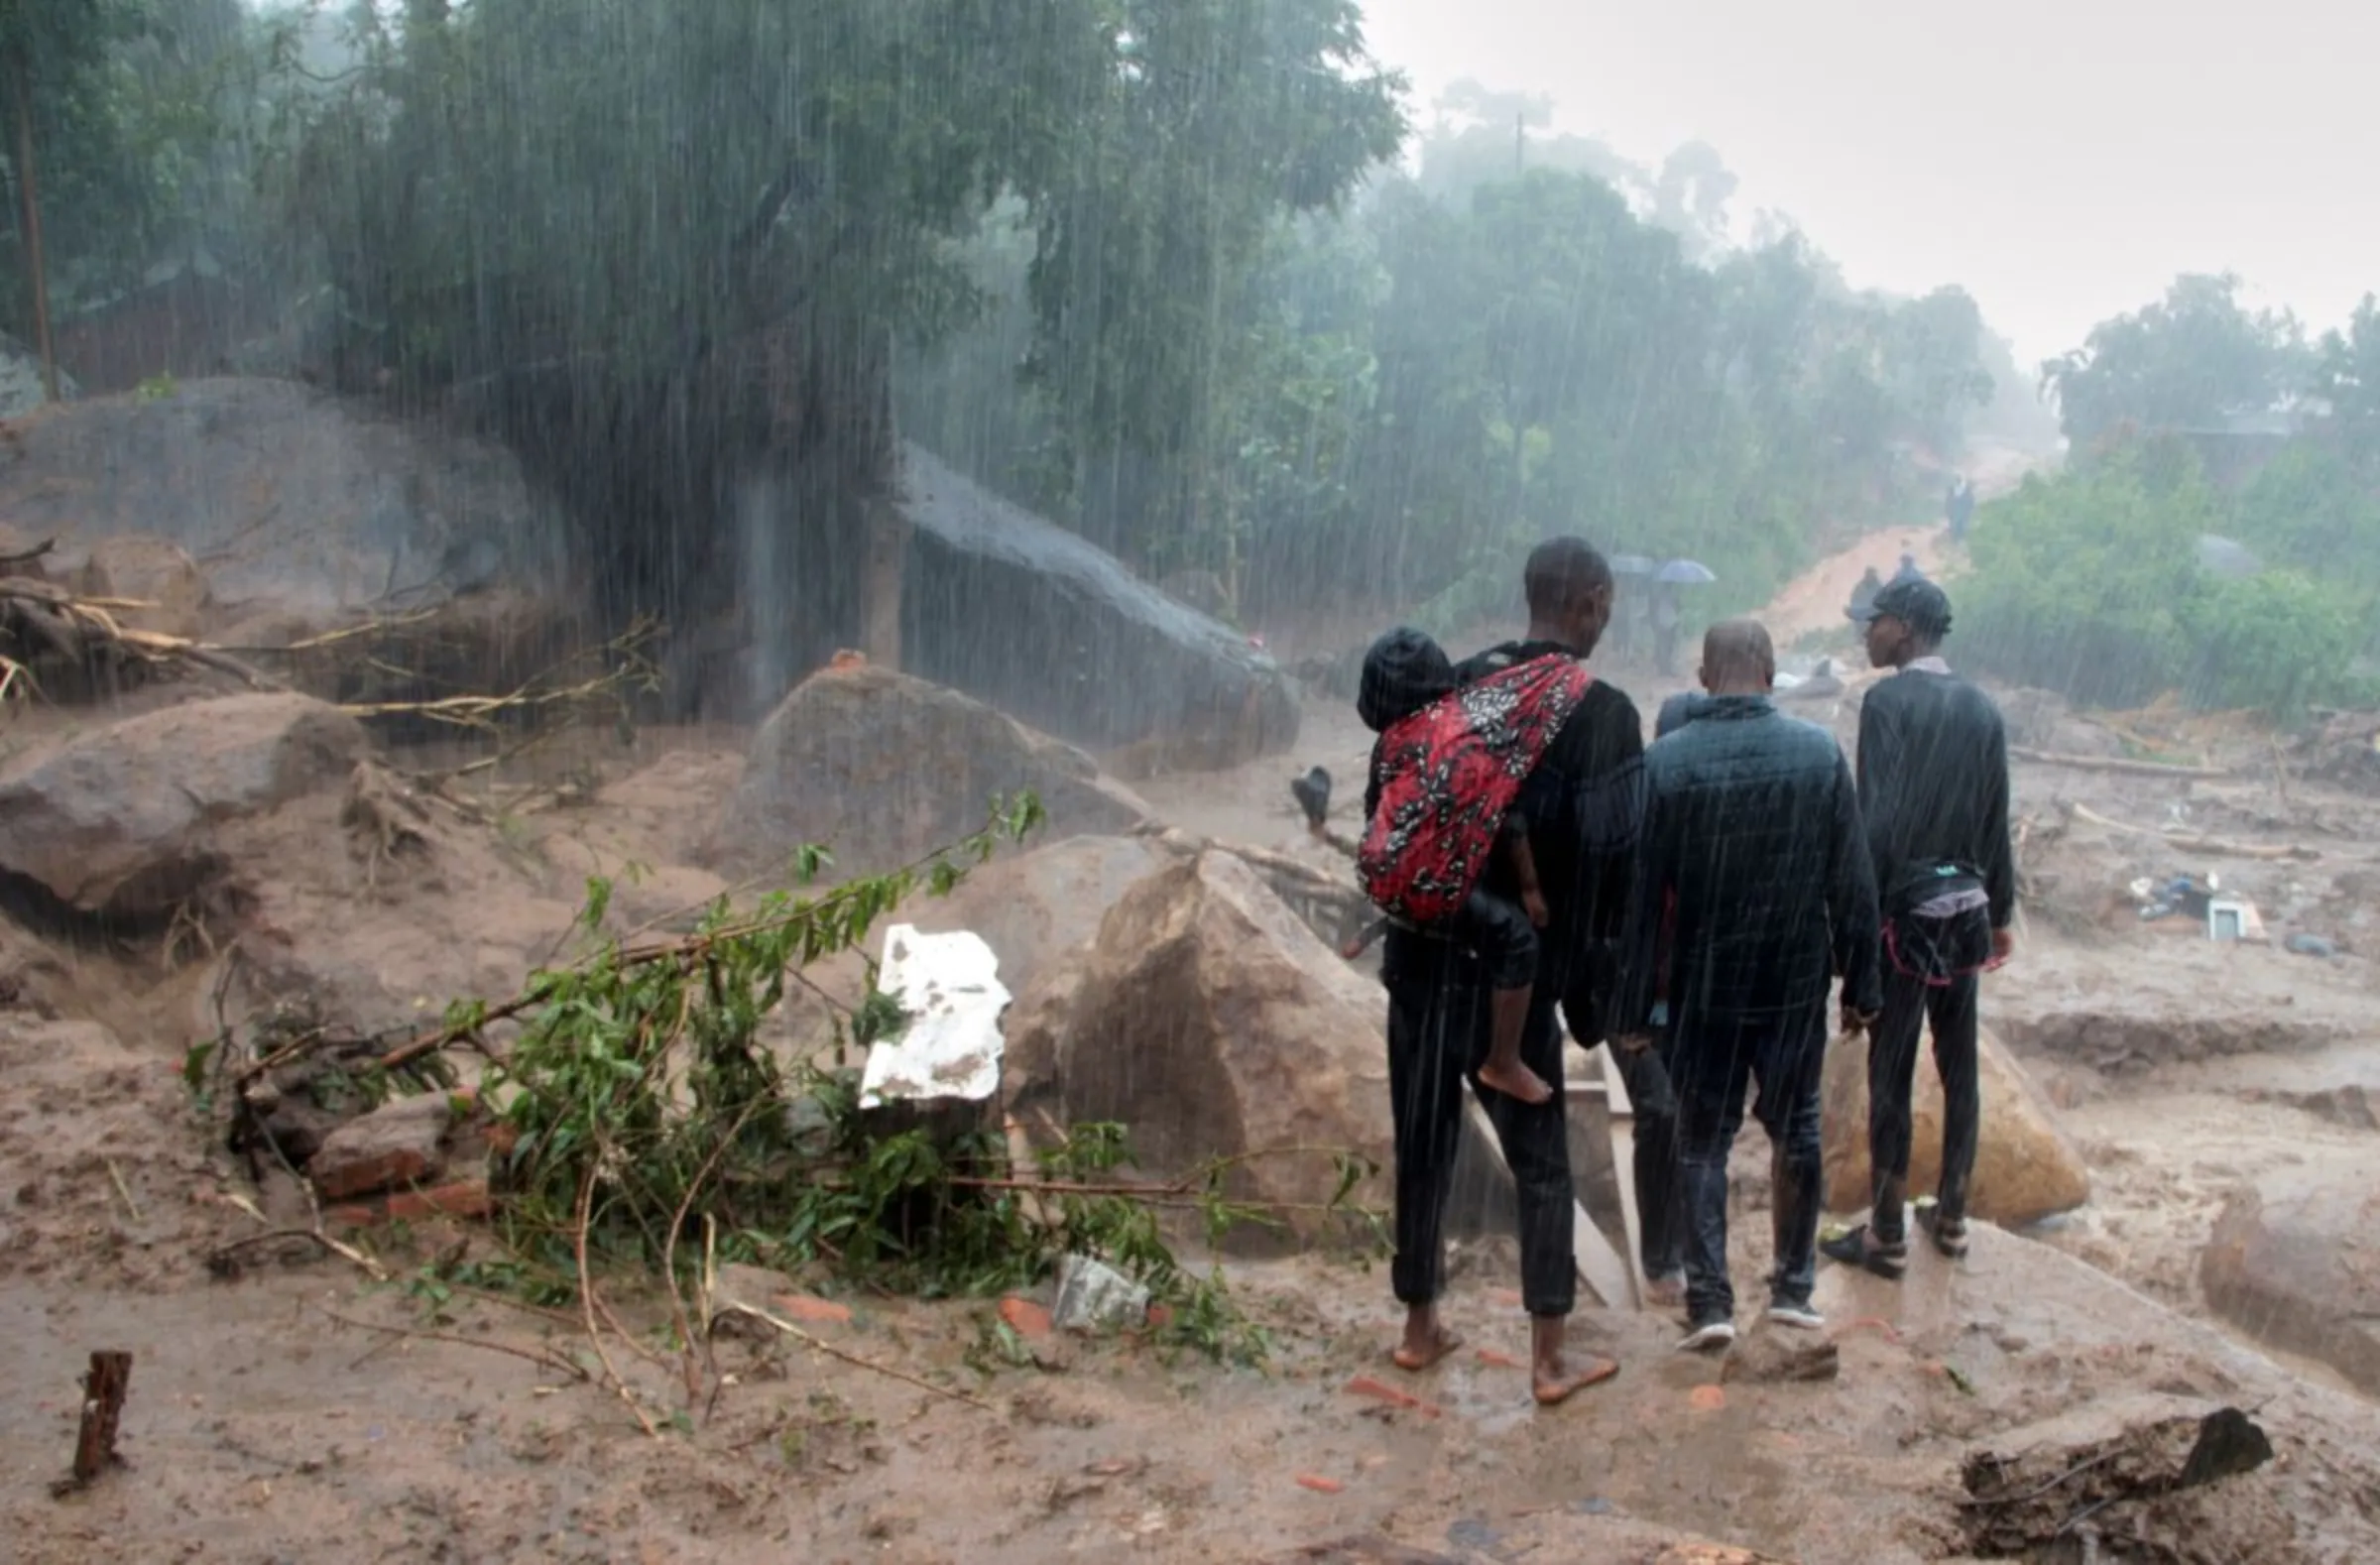 People look at the damage caused by Cyclone Freddy in Chilobwe, Blantyre, Malawi, March 13, 2023. REUTERS/Eldson Chagara.